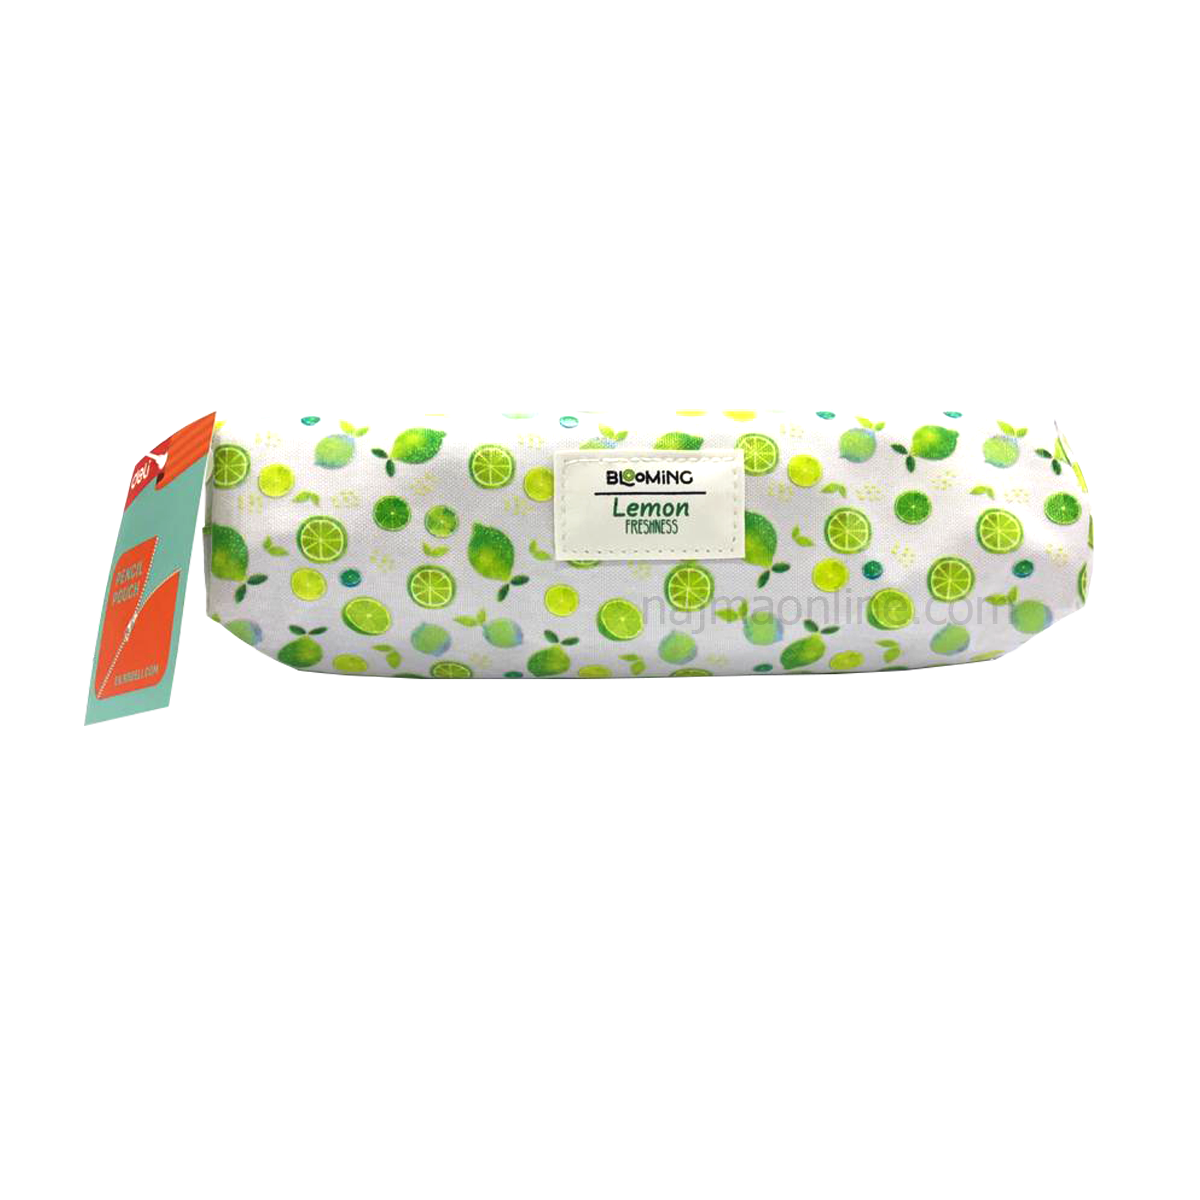 White and Green Color Pencil Case